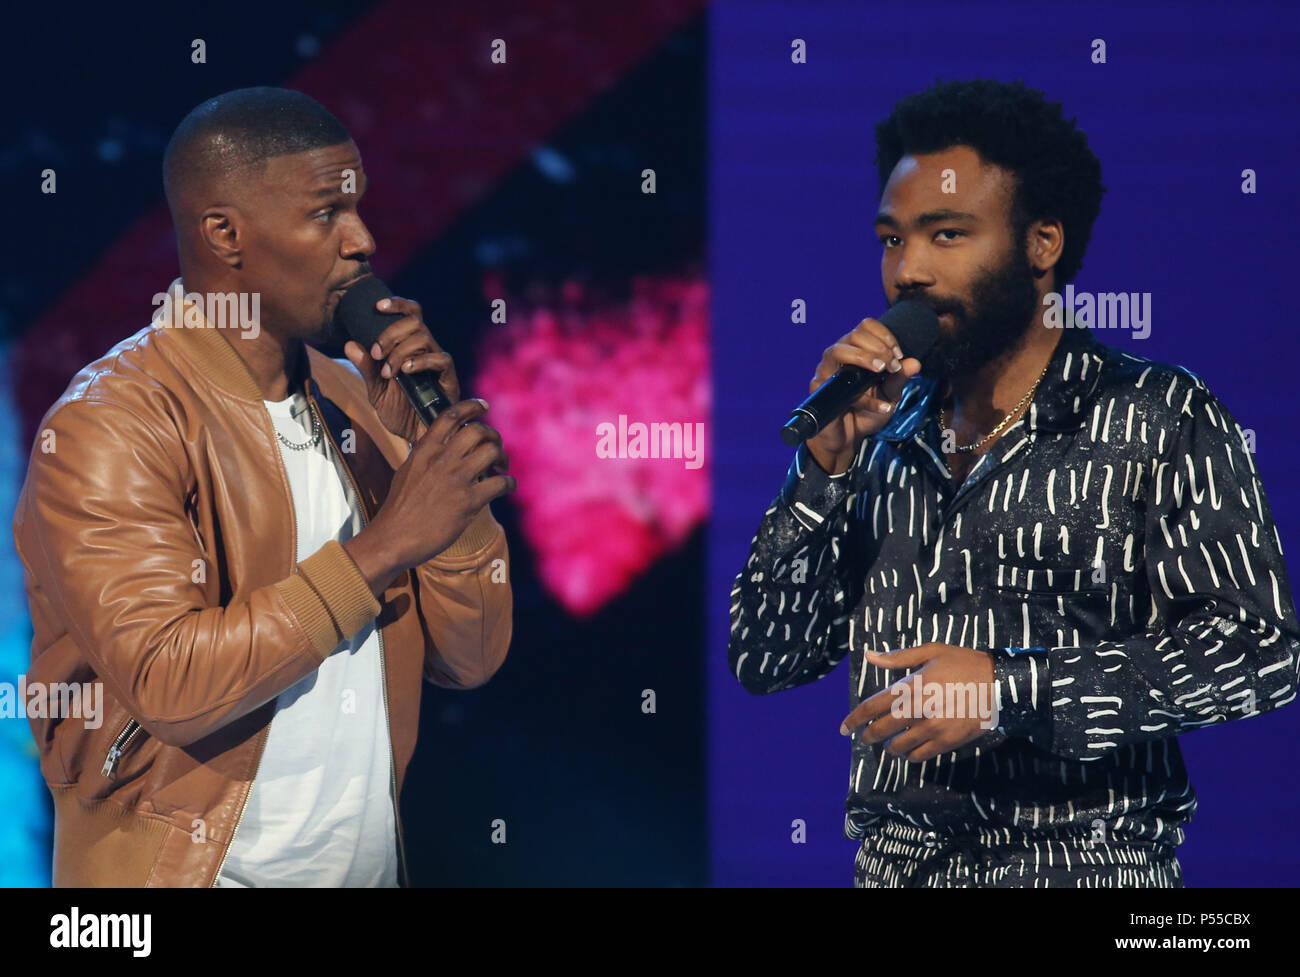 LOS ANGELES, CA - JUNE 24: Jamie Foxx, Donald Glover, Childish Gambino, at the 2018 BET Awards -  Show at the Microsoft Theater in Los Angeles, California on June 24, 2018. Credit: Faye Sadou/MediaPunch Stock Photo